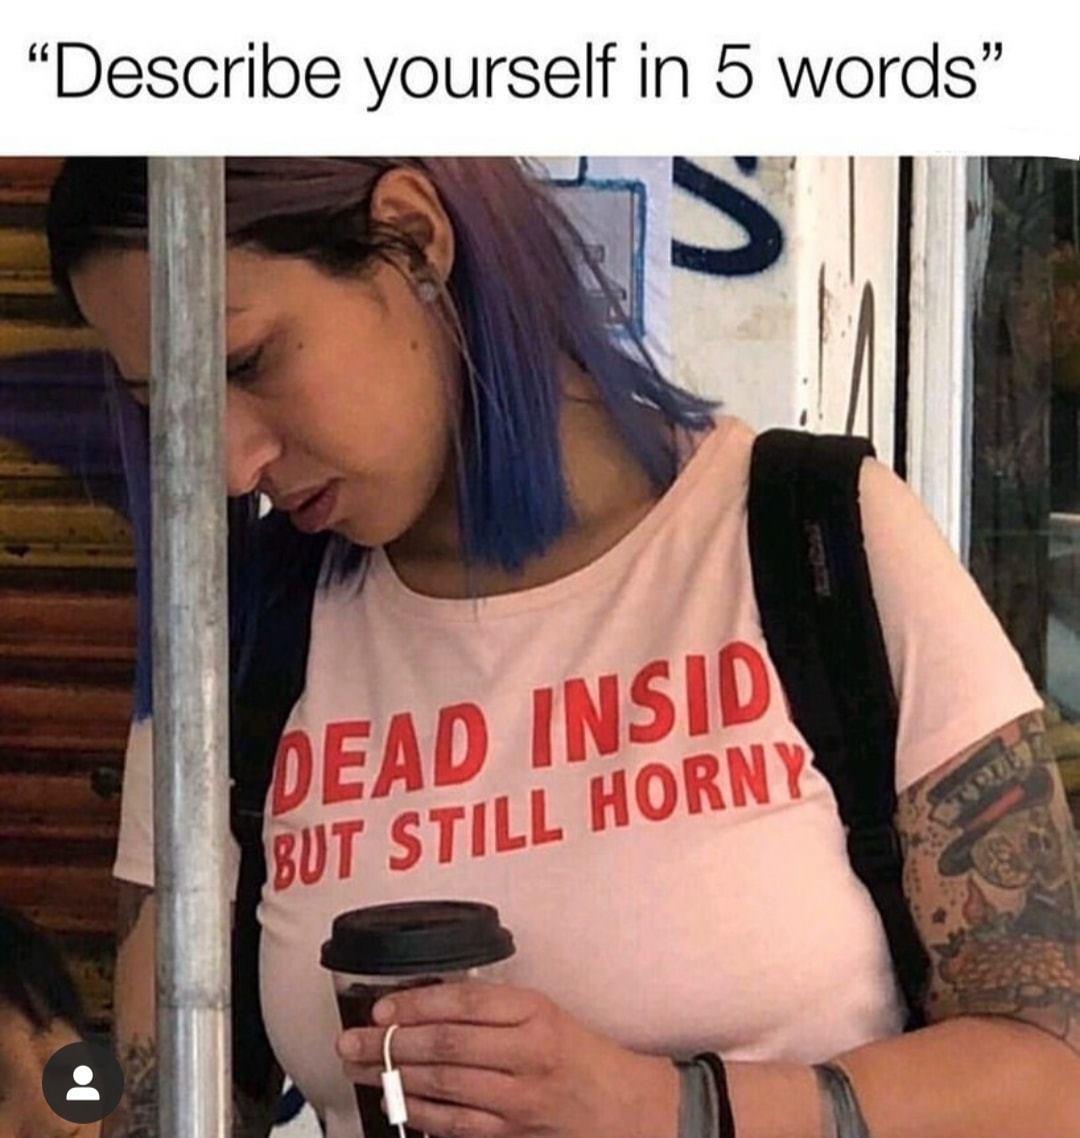 naugty memes - "Describe yourself in 5 words Dead Insid But Still Horny